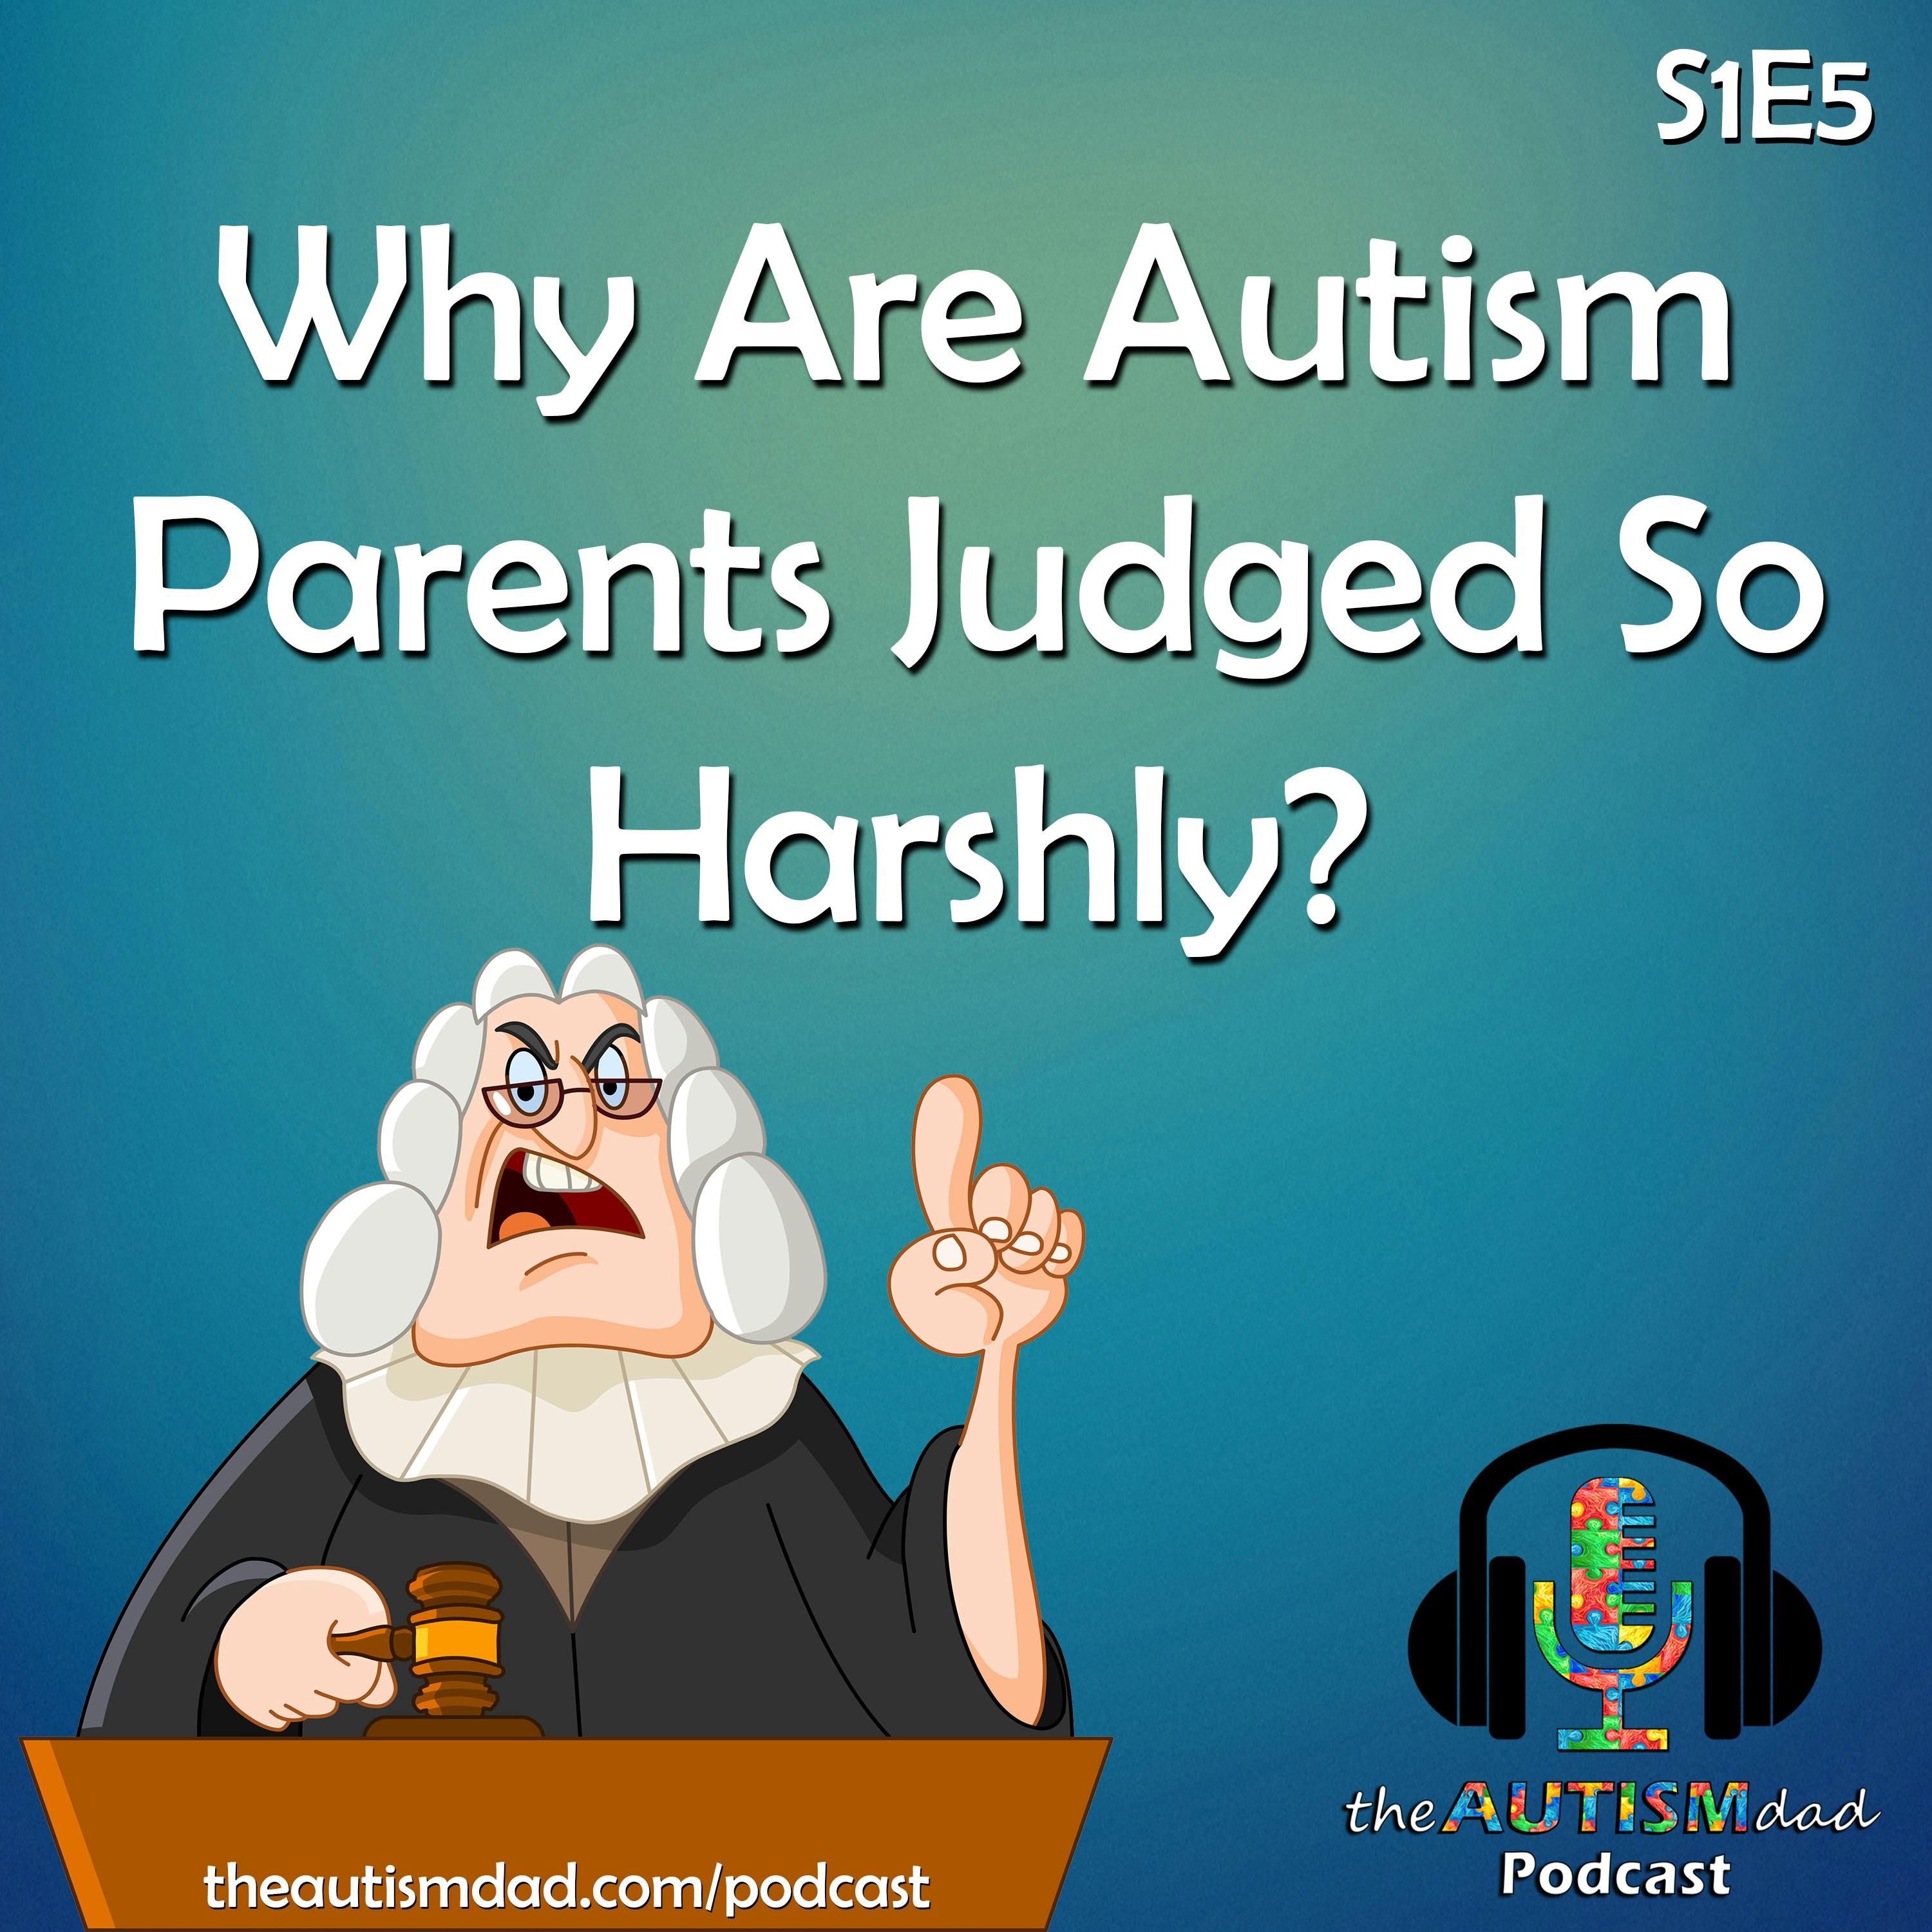 Why Are Autism Parents Judged So Harshly? Image